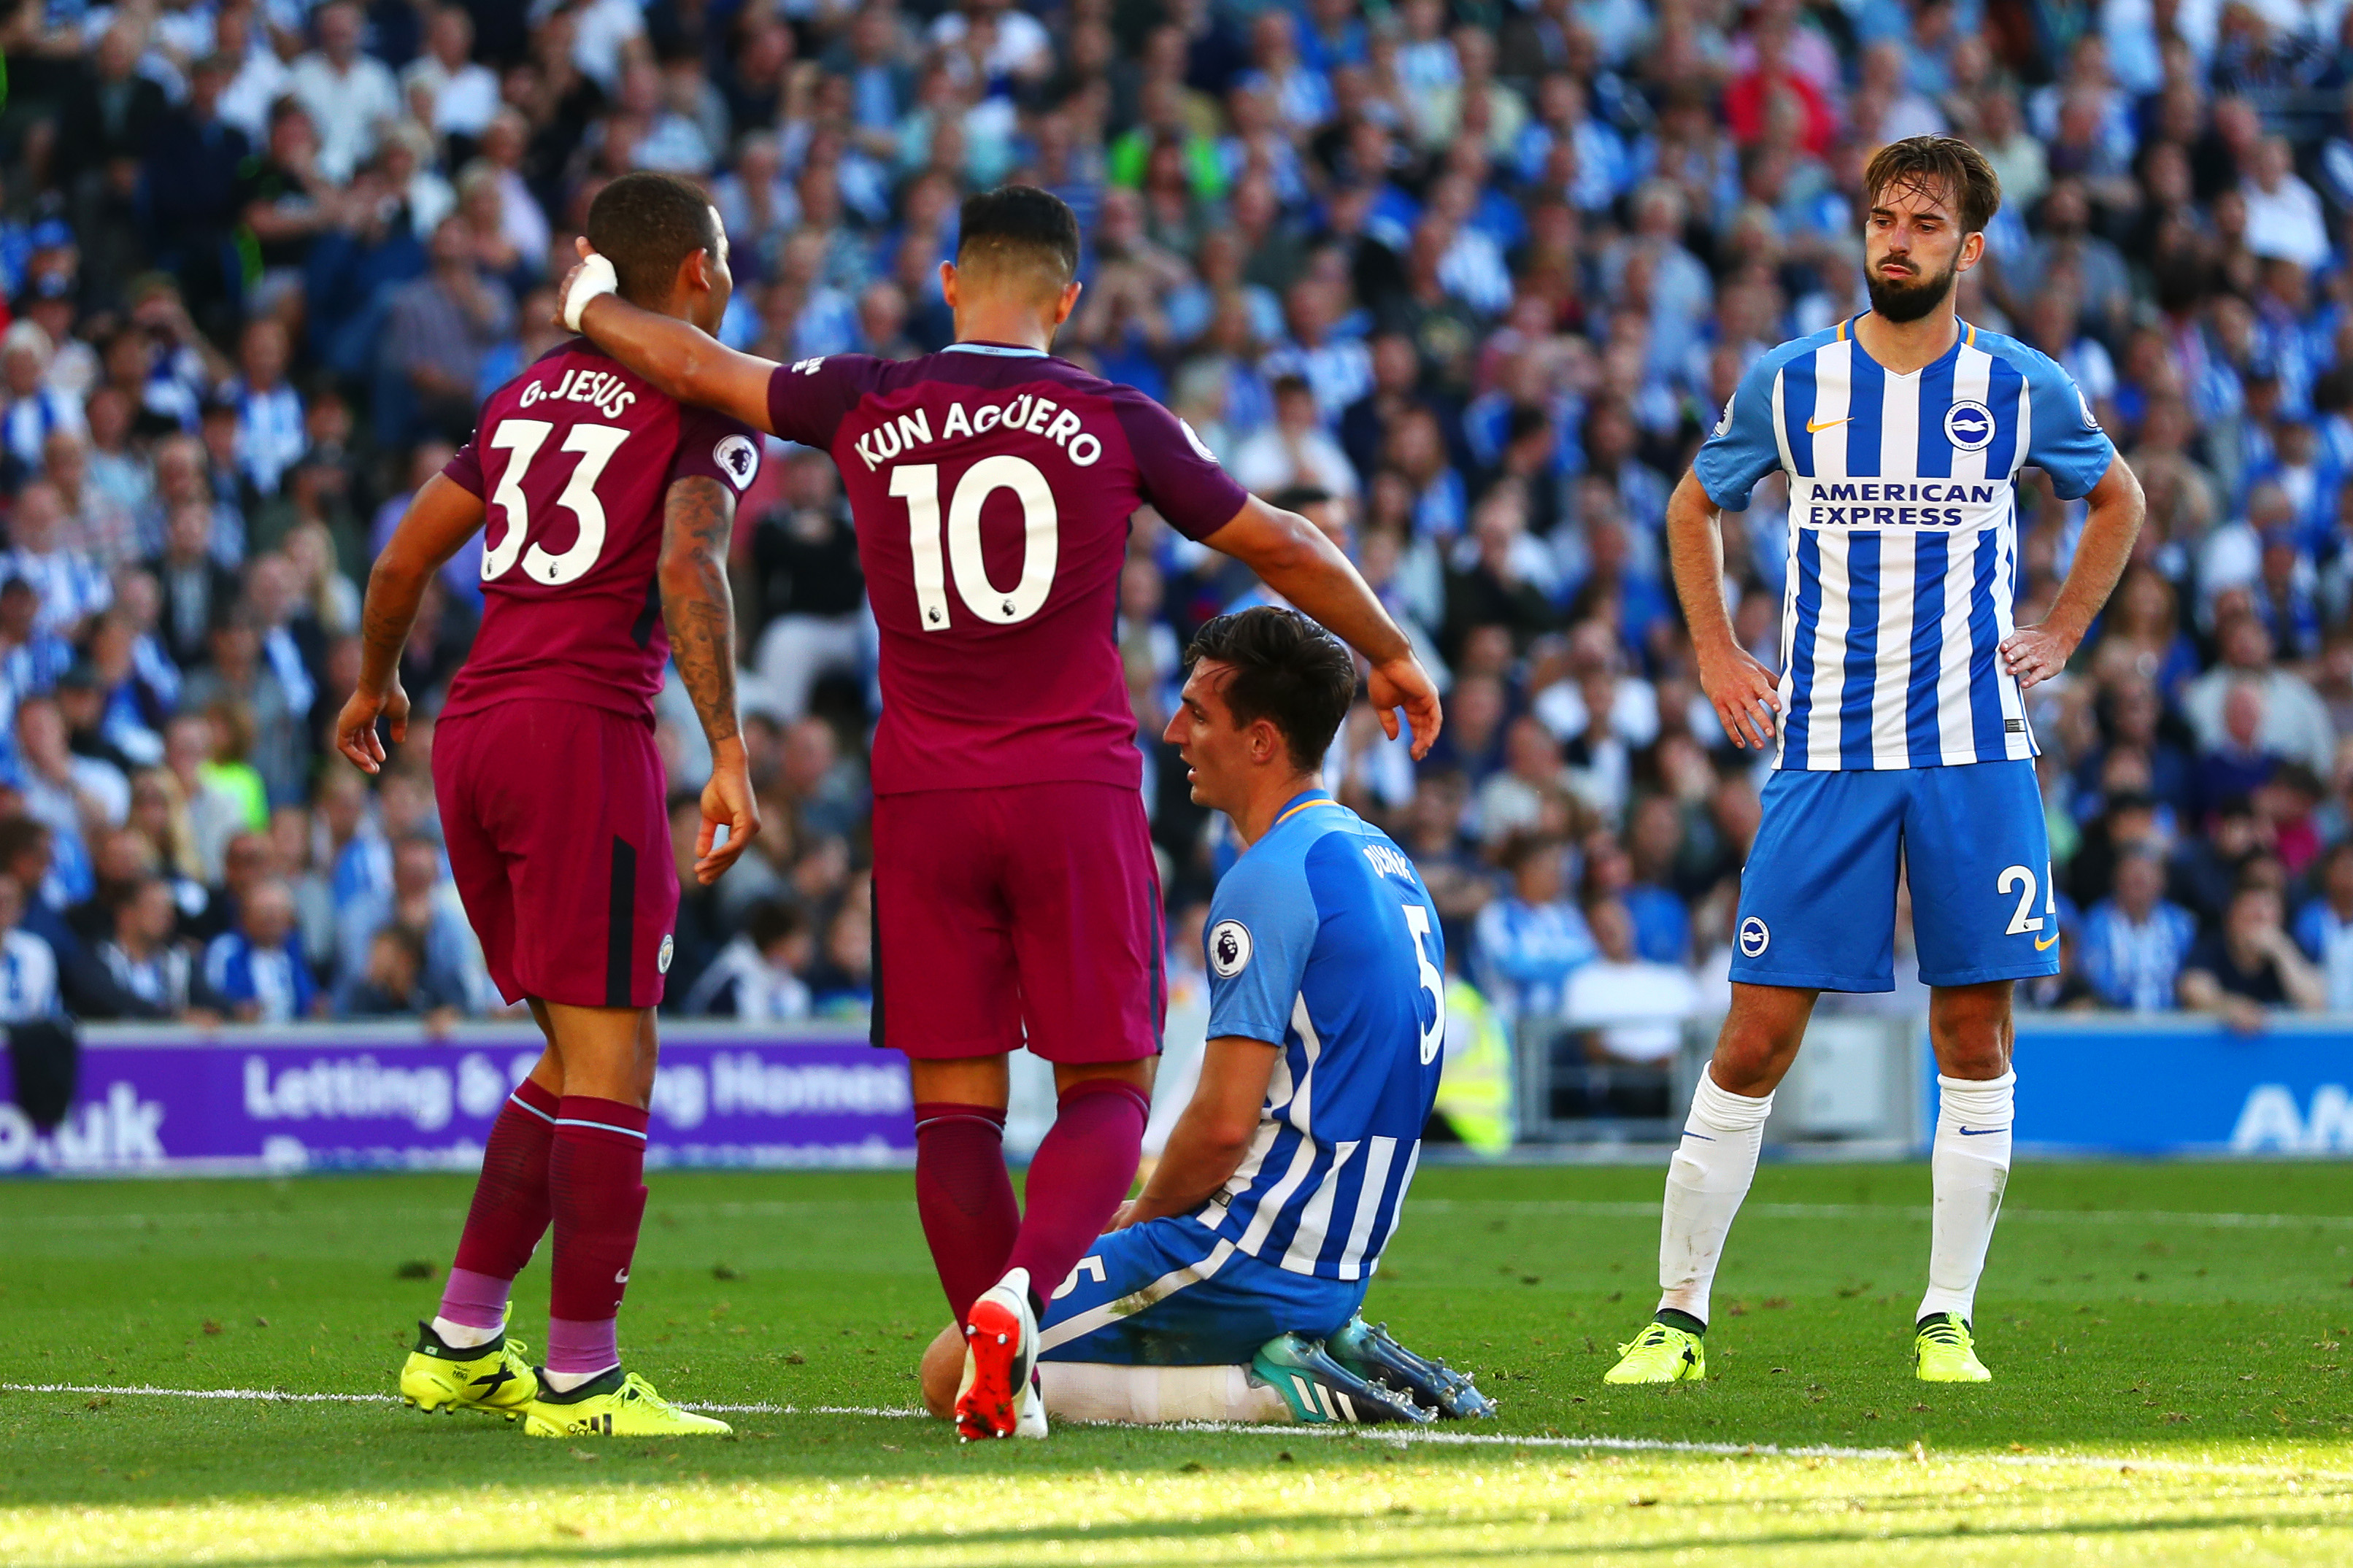 BRIGHTON, ENGLAND - AUGUST 12:  Lewis Dunk of Brighton and Hove Albion shows his dejection after scoring an own goal as Sergio Aguero and Gabriel Jesus of Manchester City celebrate during the Premier League match between Brighton and Hove Albion and Manchester City at Amex Stadium on August 12, 2017 in Brighton, England.  (Photo by Dan Istitene/Getty Images)